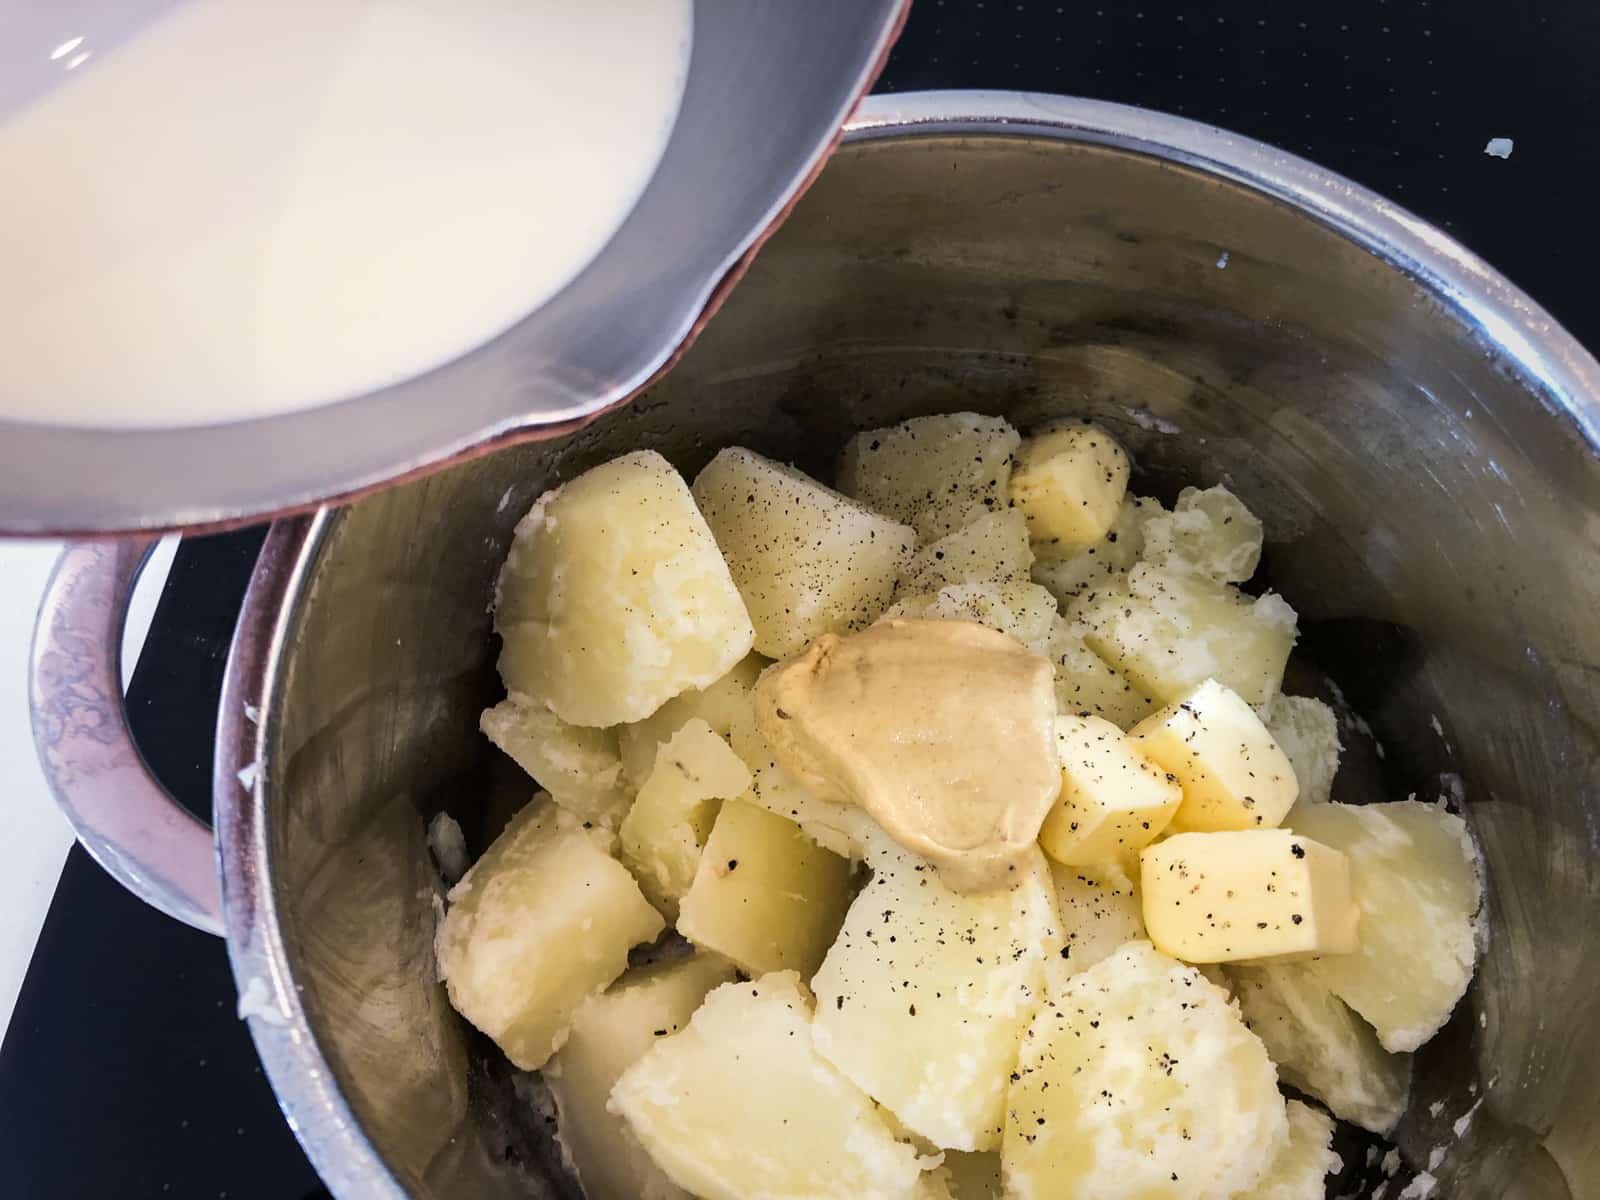 Adding warmed cream to cooked seasoned potatoes with a dollop of mustard before mashing.